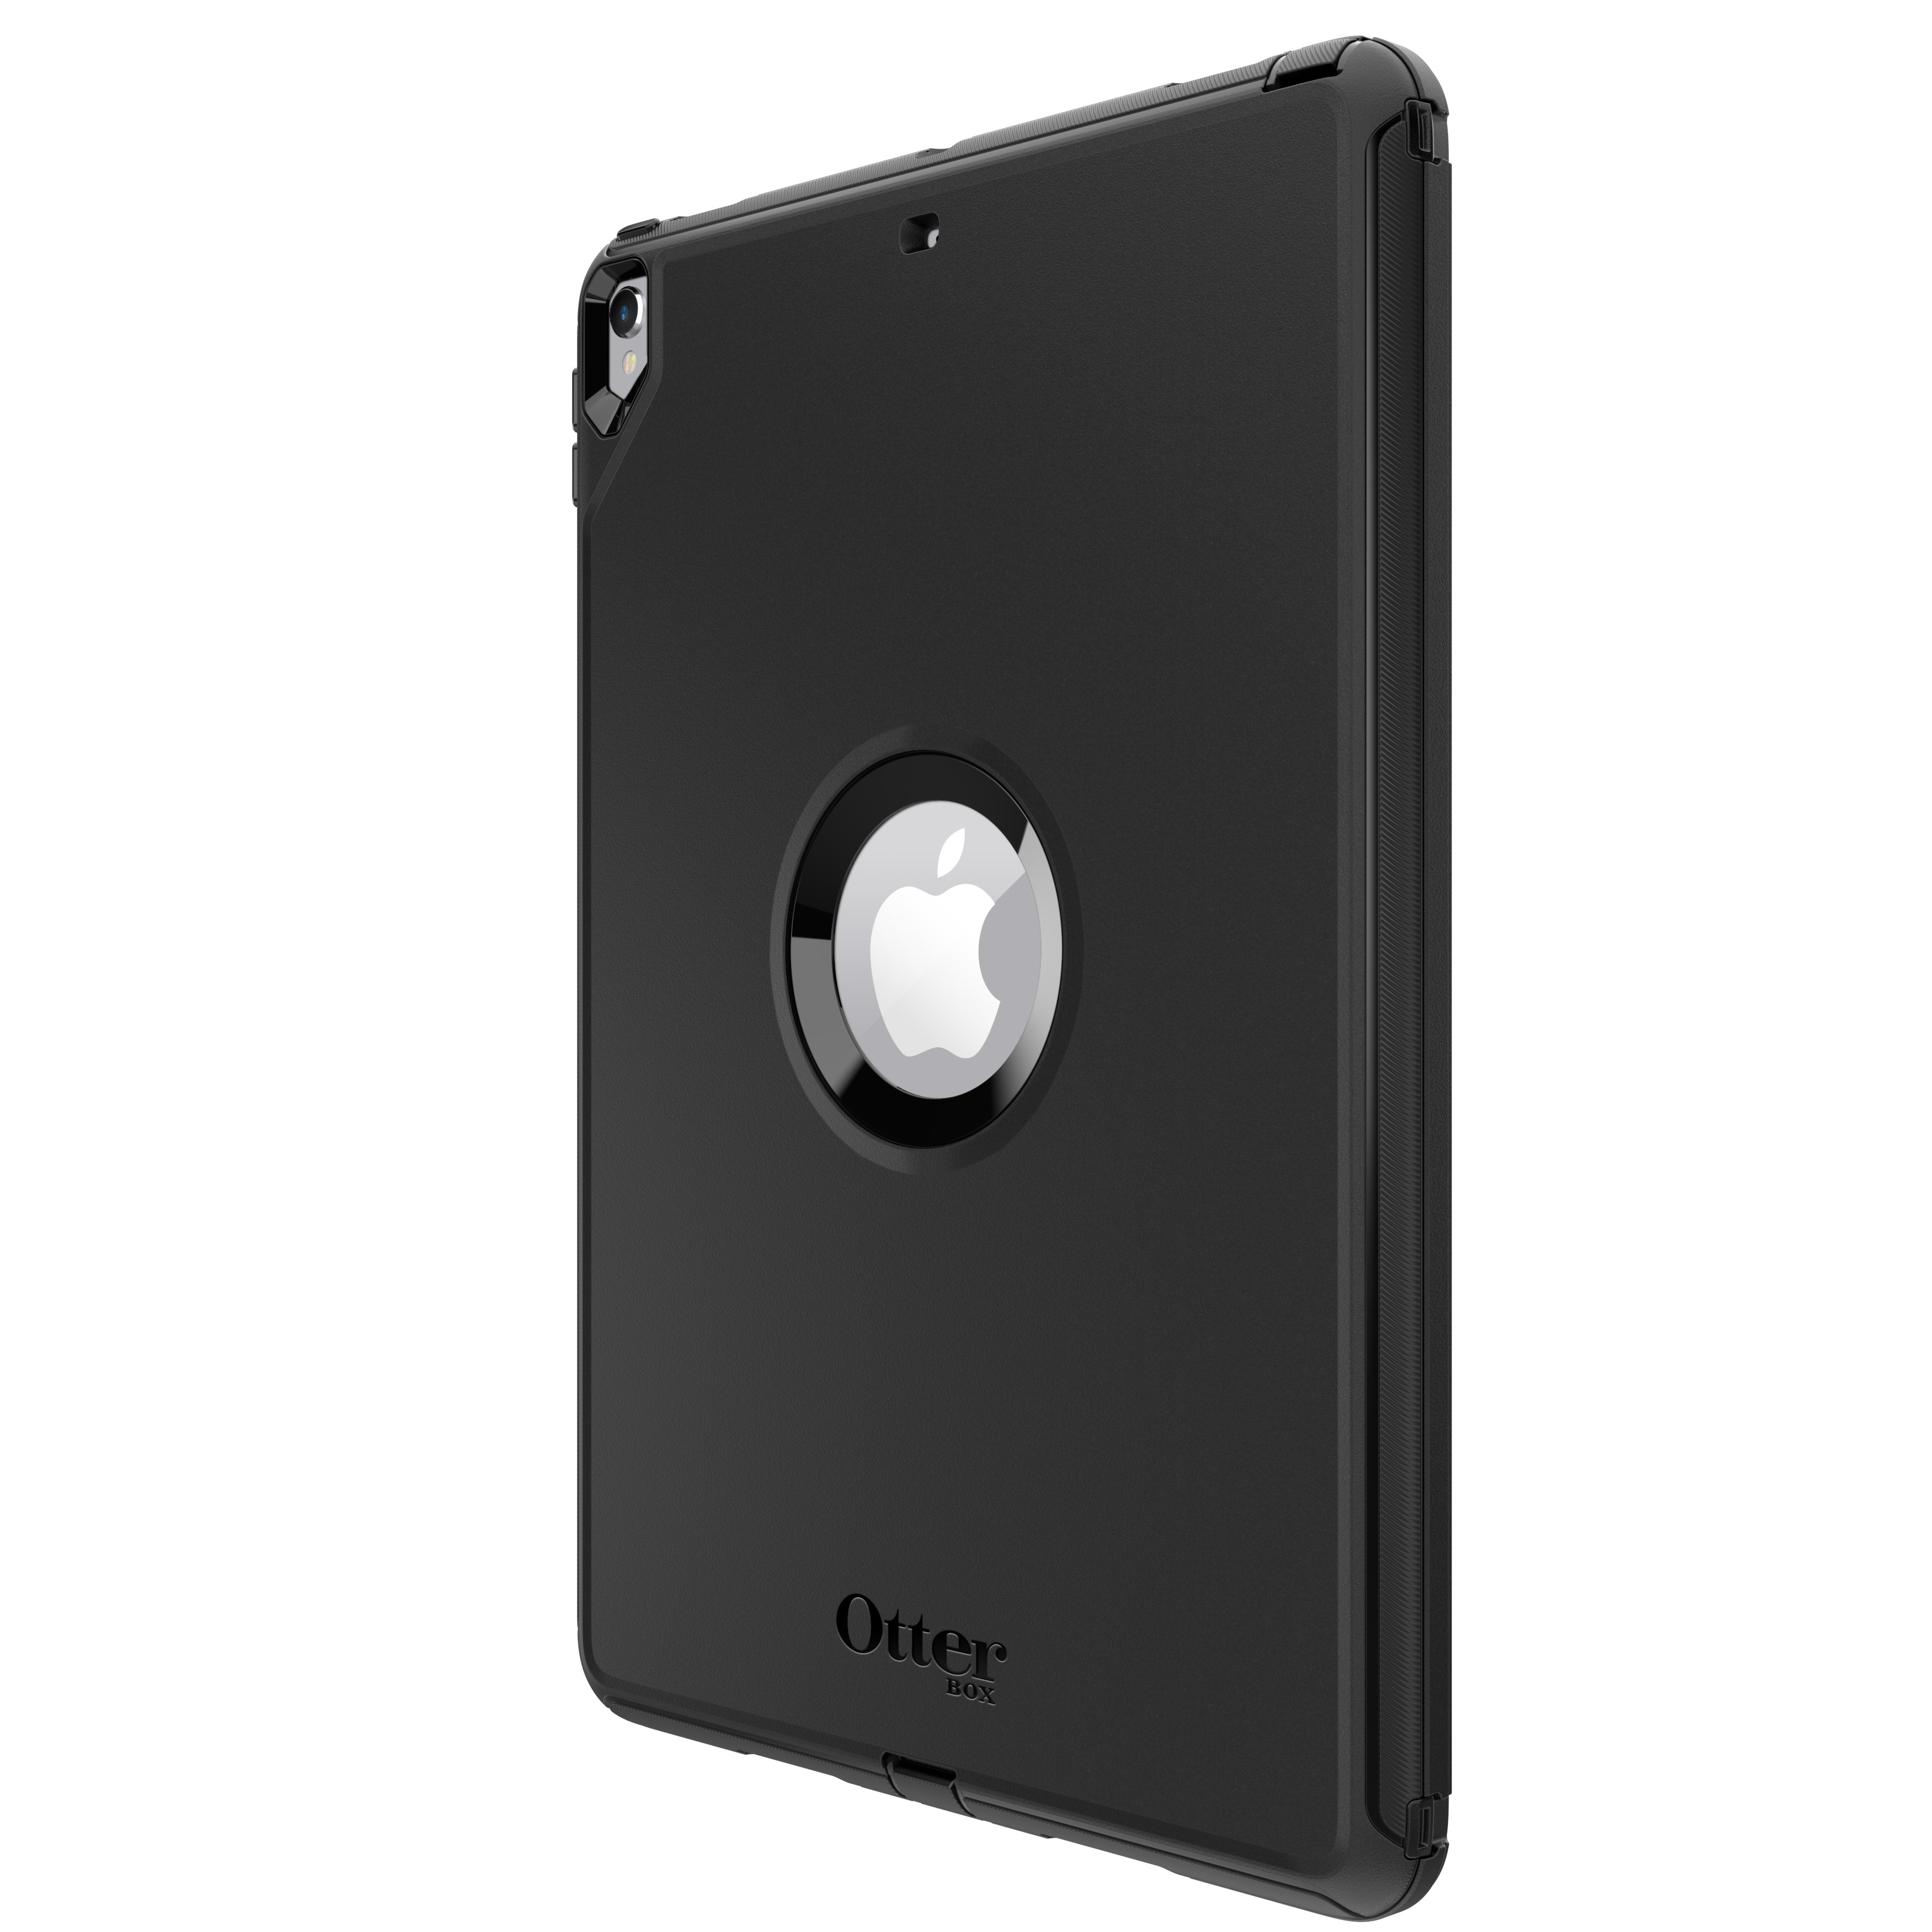 Otterbox - Defender Tablet Case for iPad Pro 10.5/Air (3rd gen), Black - image 4 of 10